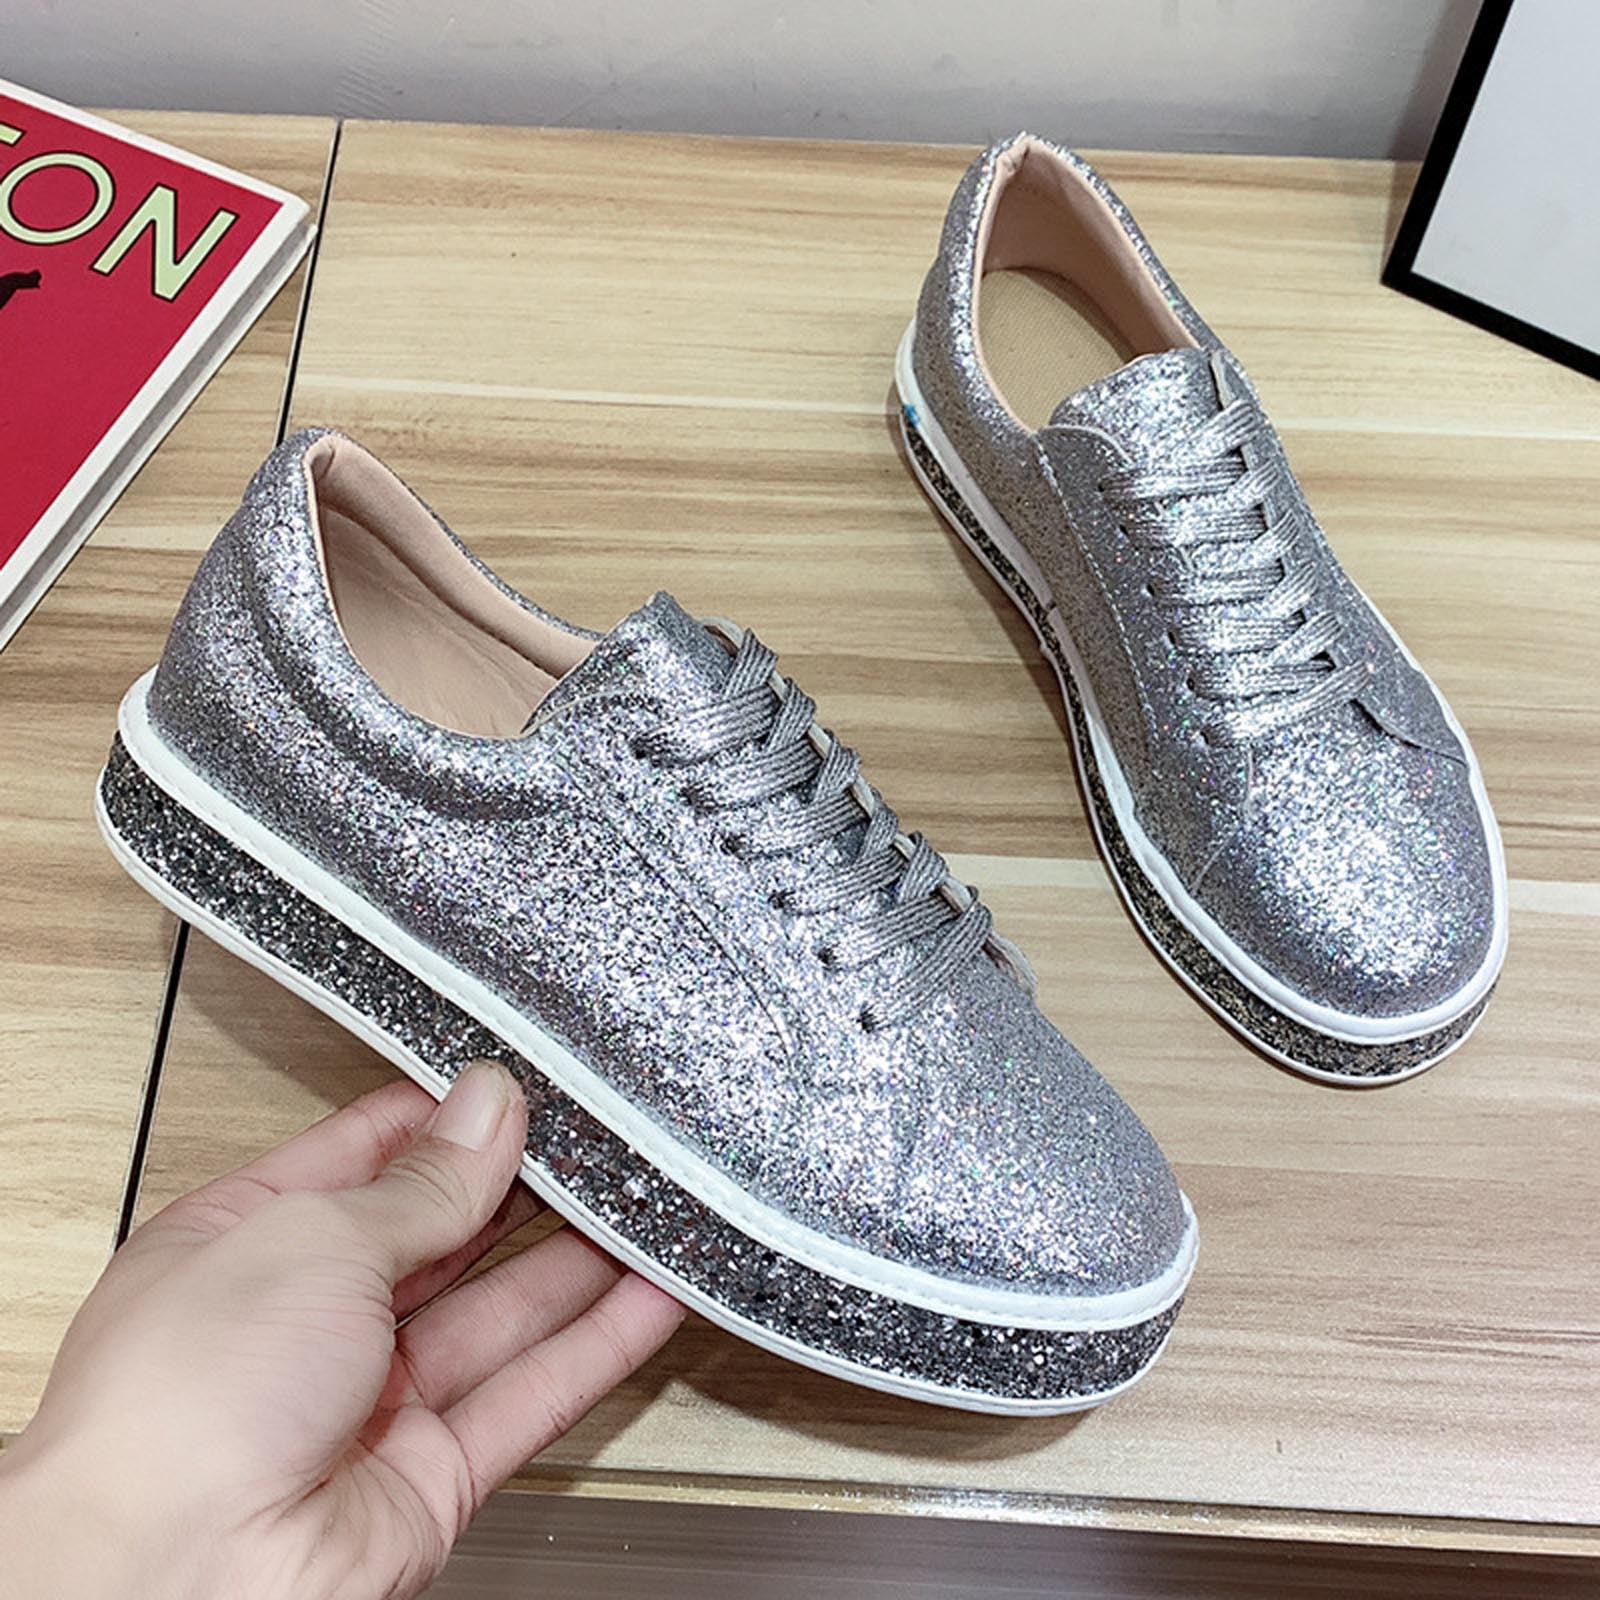 Jsezml Women's Glitter Shoes Sparkly Sequins Tennis Shoes Low Top Lace Up  Canvas Sneakers Fashion Casual Walking Shoes